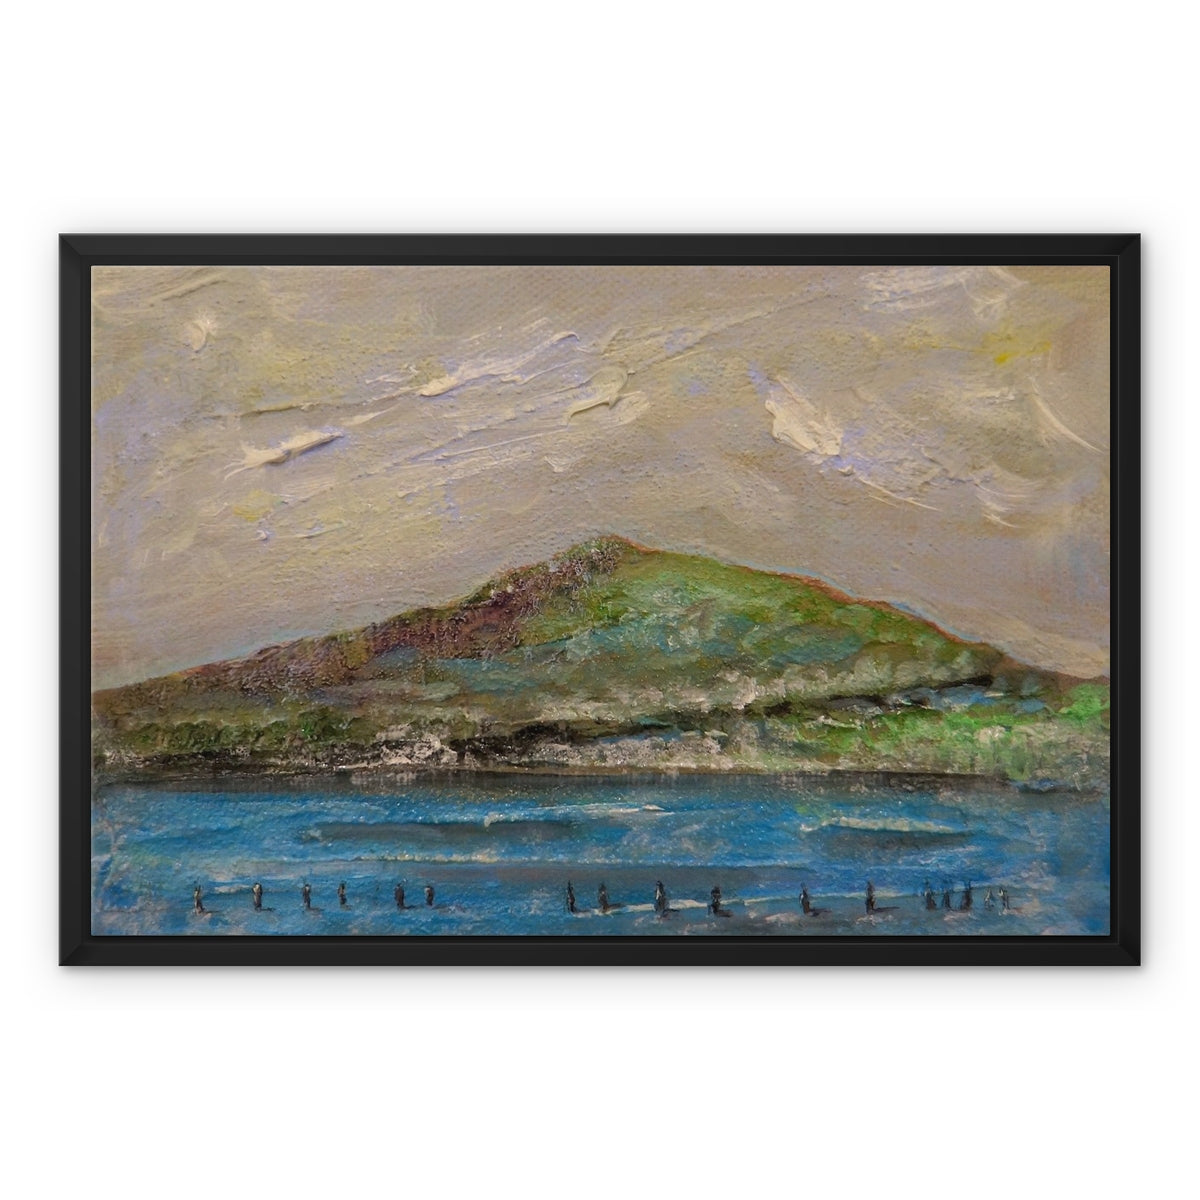 Ben Lomond iii Painting | Framed Canvas From Scotland-Floating Framed Canvas Prints-Scottish Lochs & Mountains Art Gallery-24"x18"-Paintings, Prints, Homeware, Art Gifts From Scotland By Scottish Artist Kevin Hunter